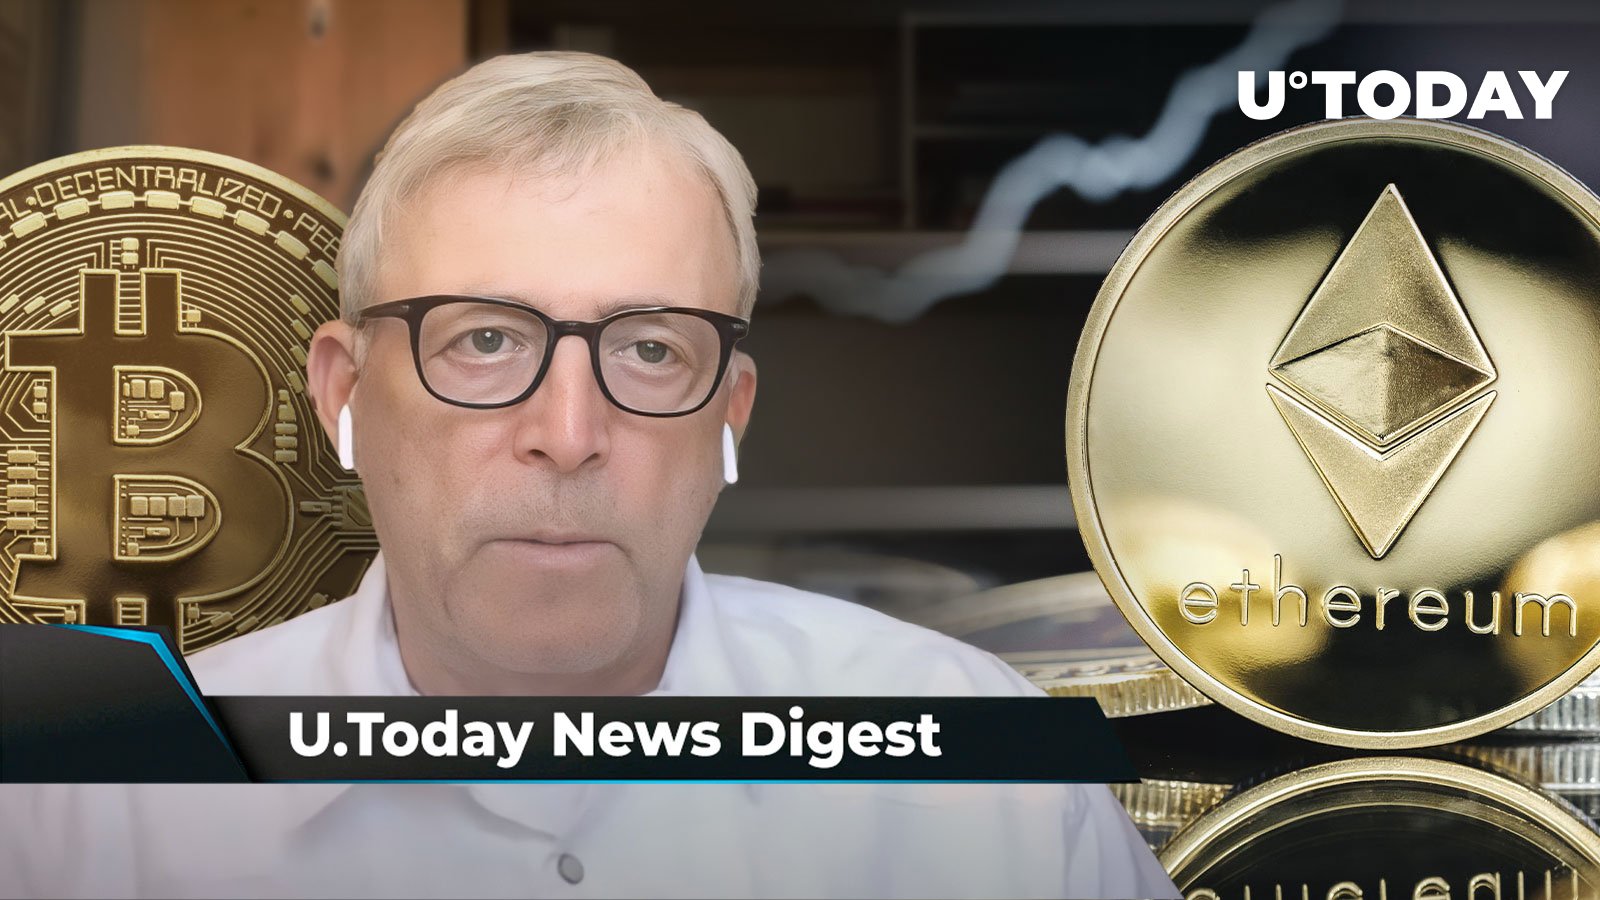 SHIB Becomes 2nd Trading Crypto on CoinMarketCap, Analyst Names Year When ETH Might Hit ,000, Peter Brandt Predicts Imminent Breakout for BTC: Crypto News Digest by U.Today